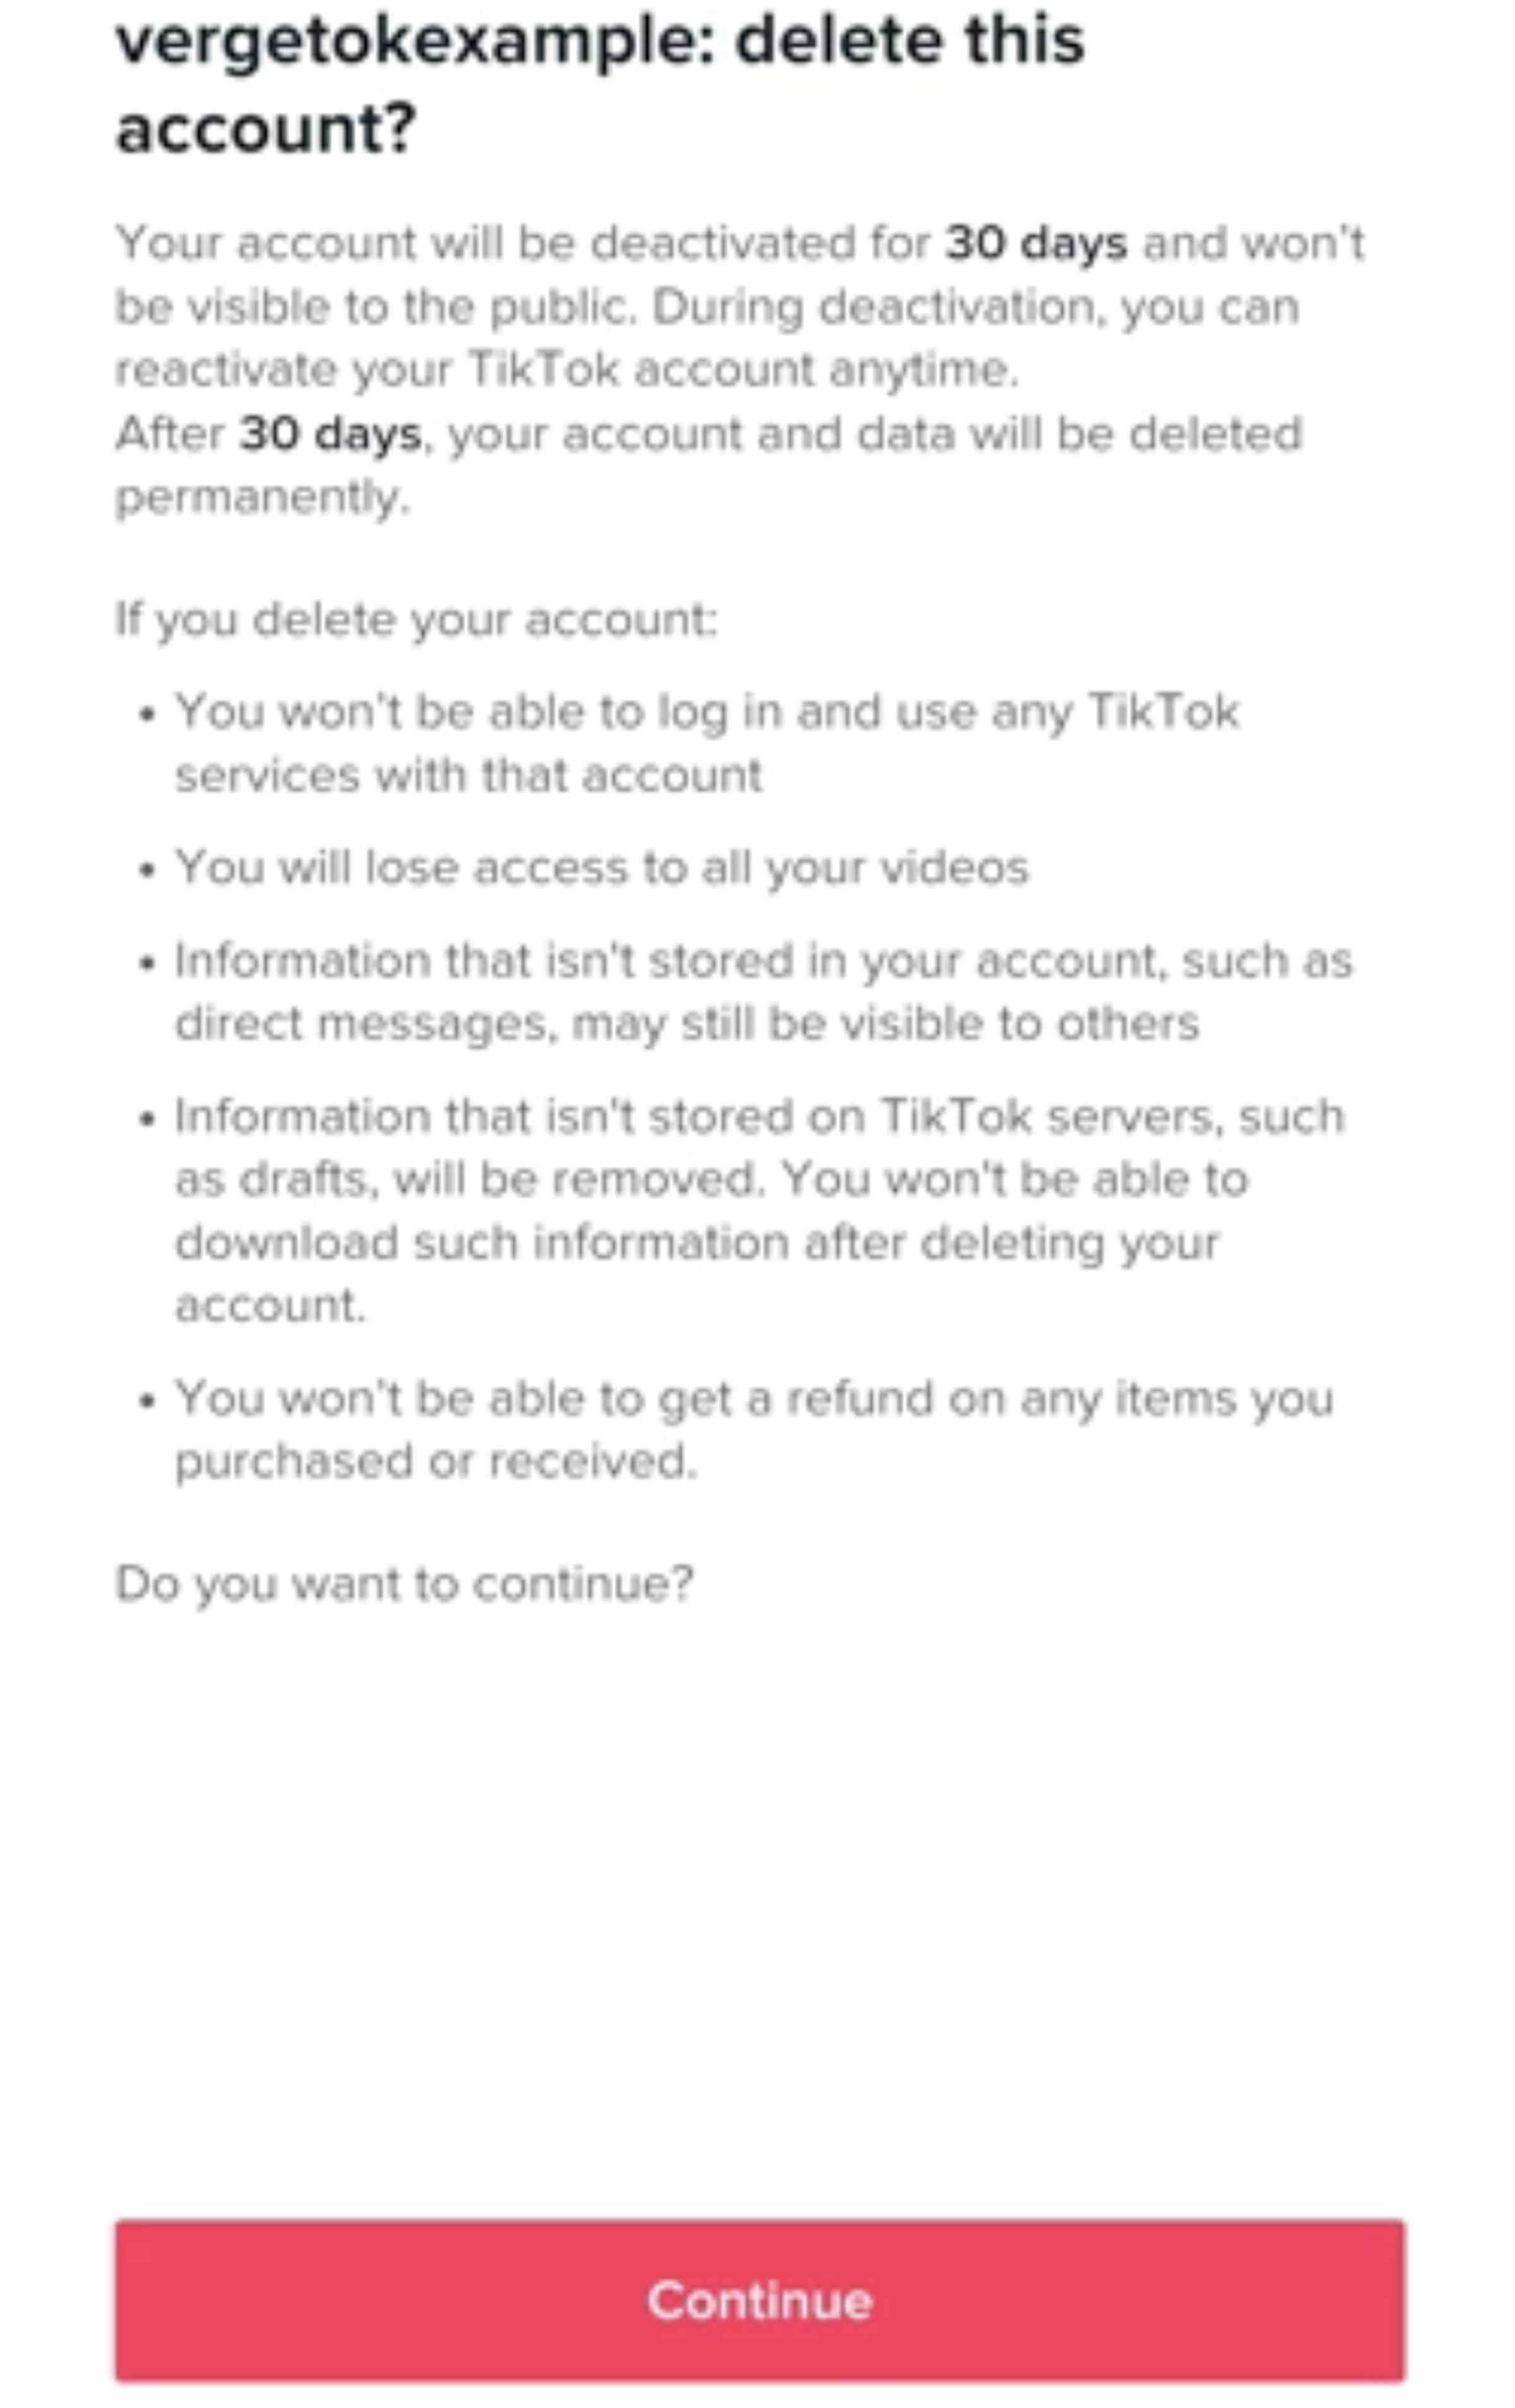 You’re able to recover your account for up to 30 days after deleting it.